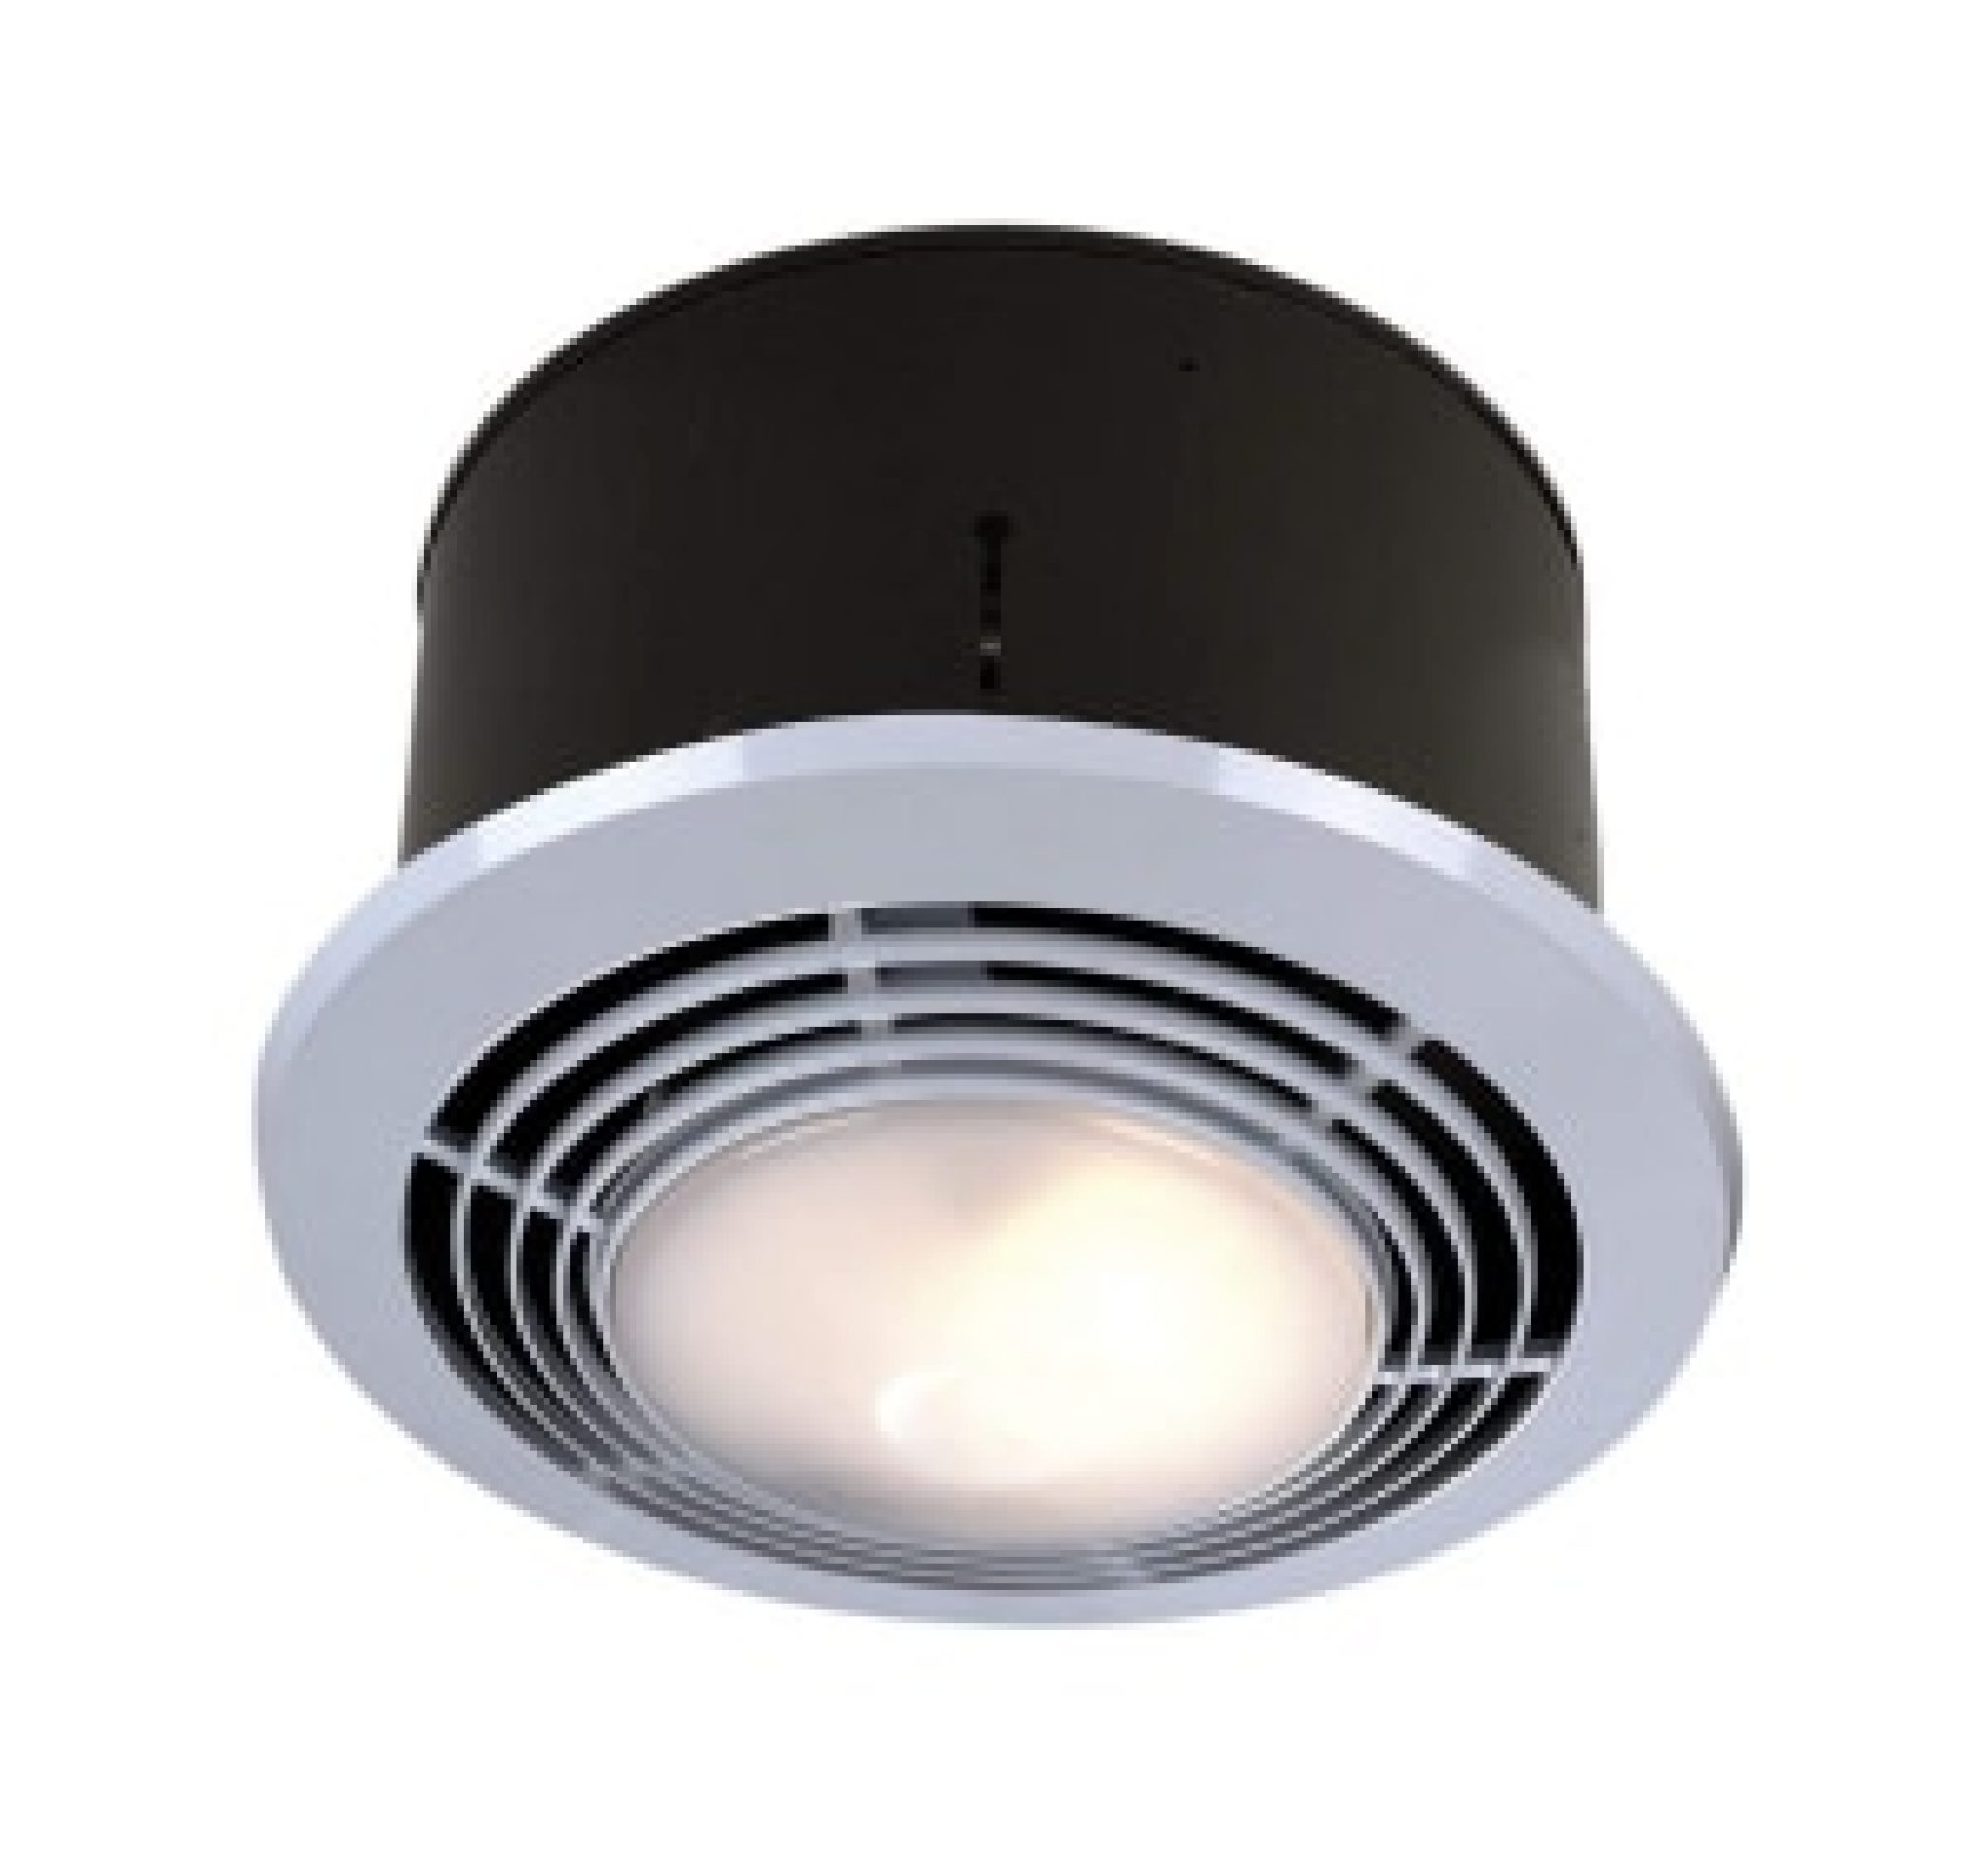 Best Bathroom Exhaust Fans With Led Light 2020 Reviews